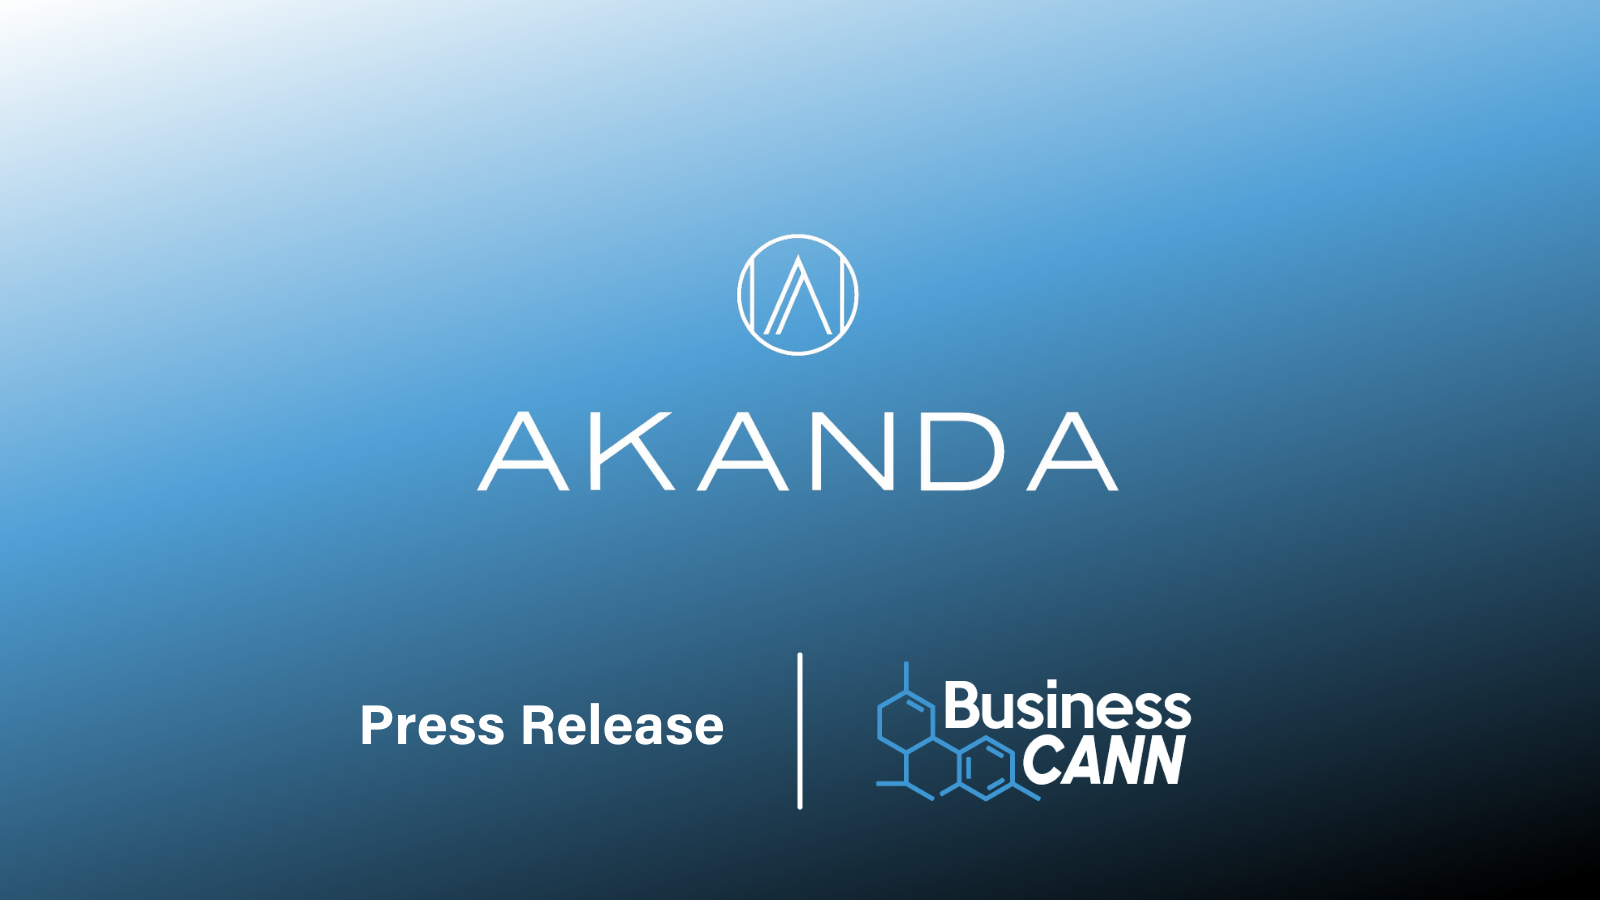 INTERNATIONAL medical cannabis platform company Akanda Corp. ("Akanda" or the “Company”) (NASDAQ: AKAN) expects to take a leading position in the fast-growing German medical cannabis market, as it prepares for first export shipment from its Portugal-based Holigen operation in the coming weeks.